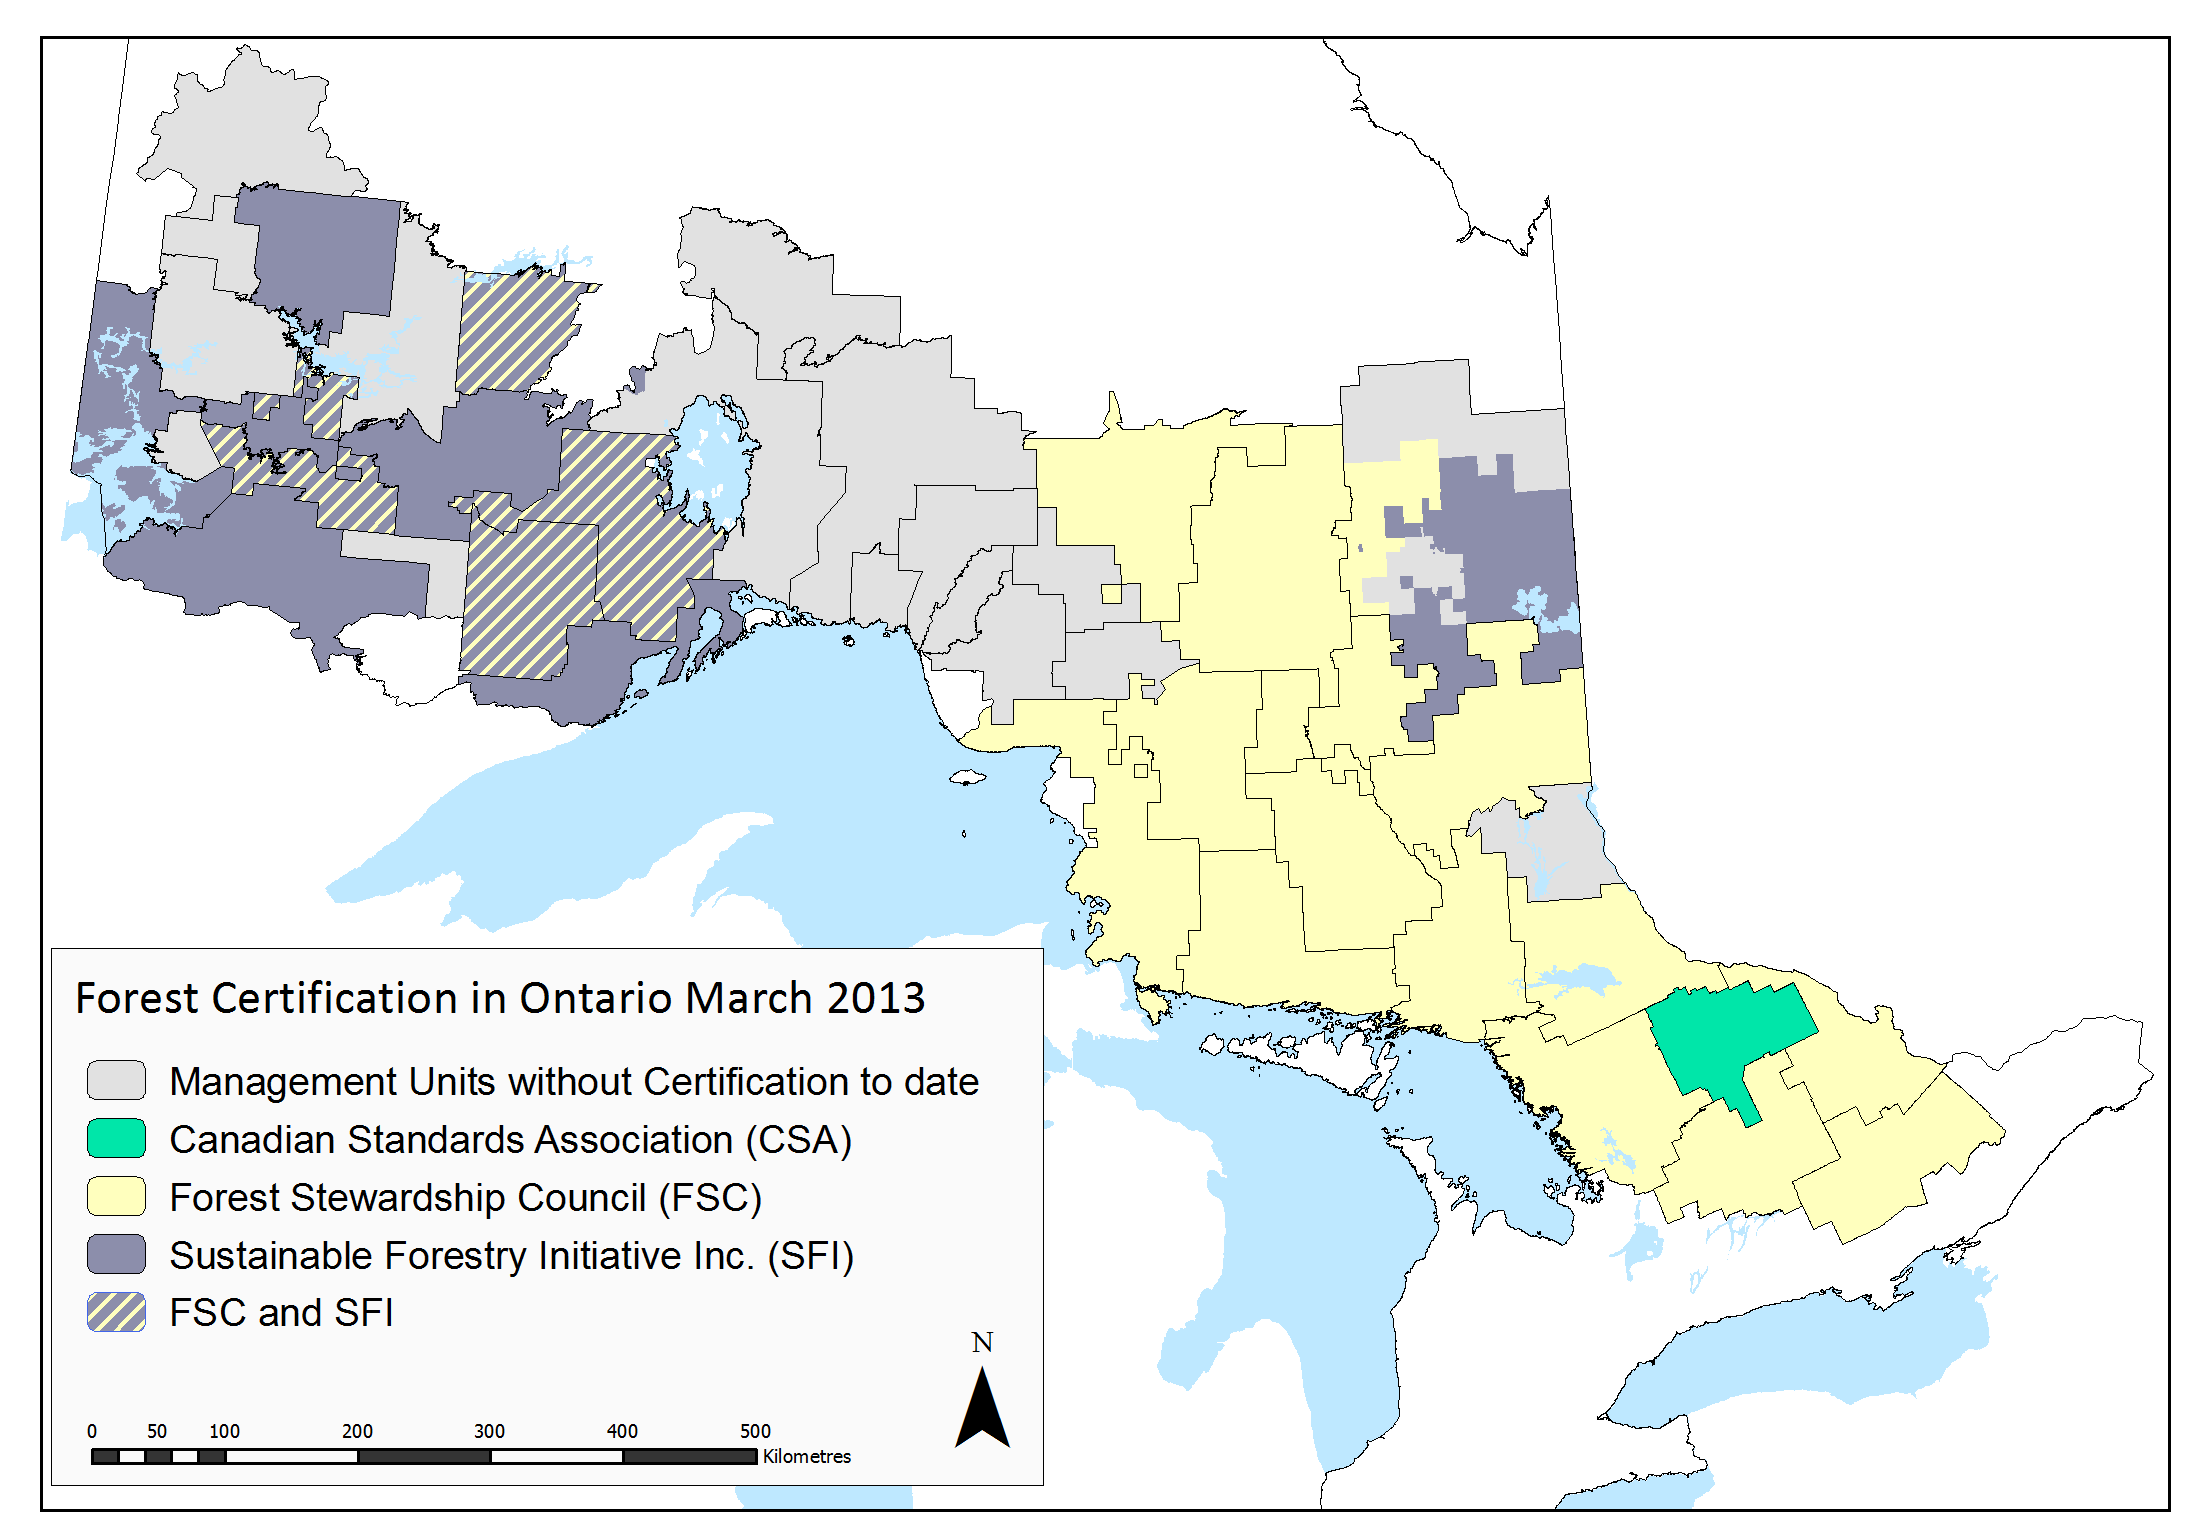 Forest Certification in Ontario March 2013